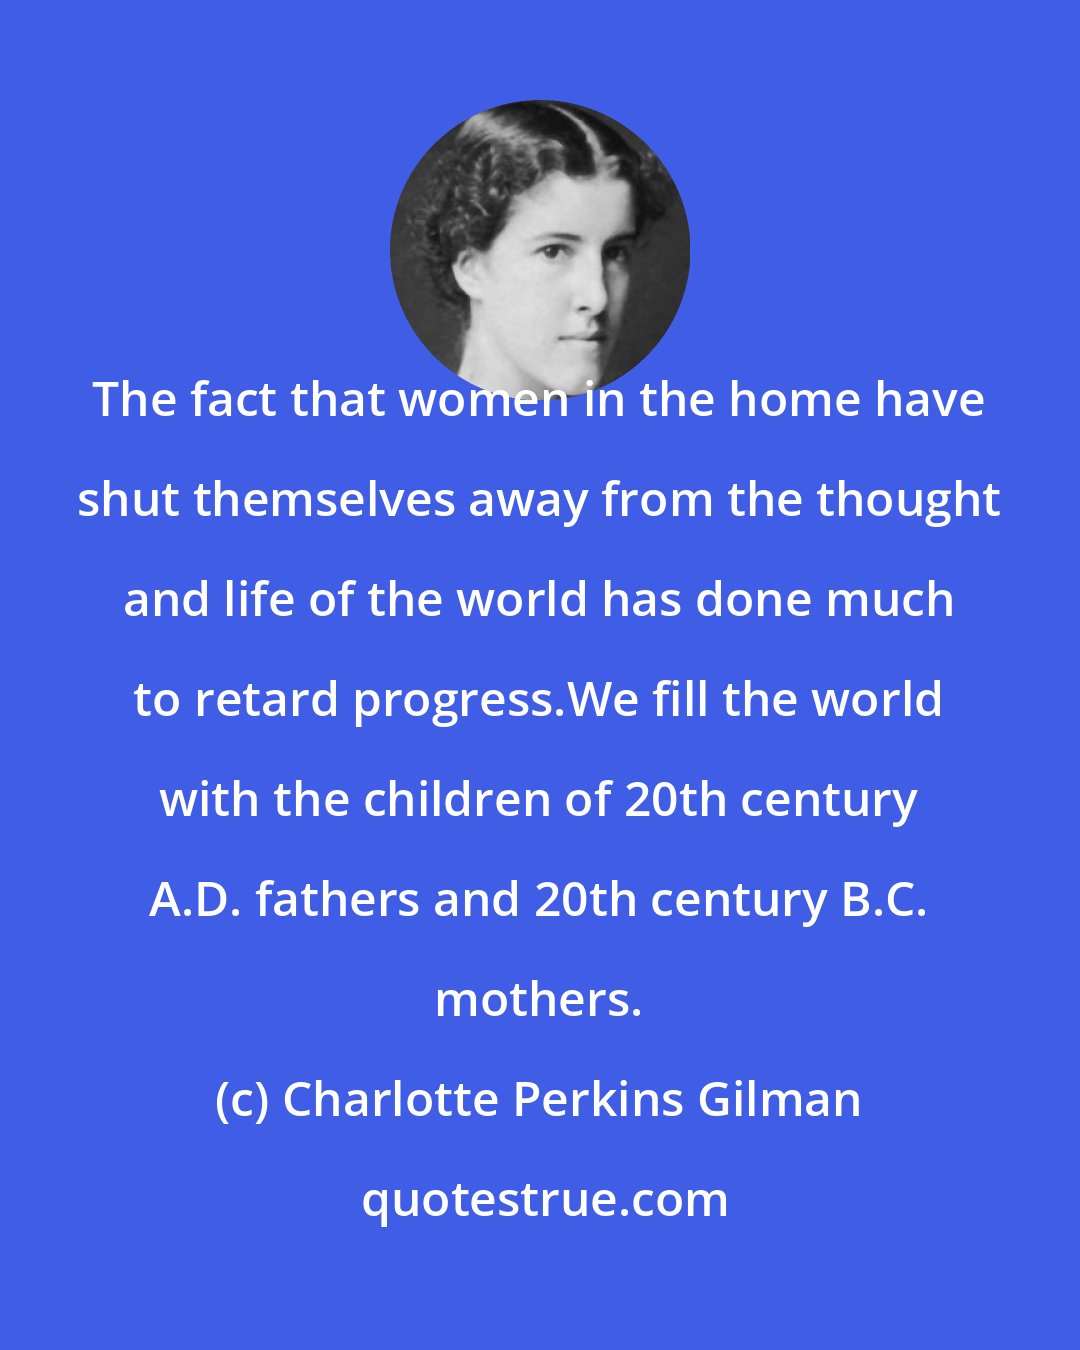 Charlotte Perkins Gilman: The fact that women in the home have shut themselves away from the thought and life of the world has done much to retard progress.We fill the world with the children of 20th century A.D. fathers and 20th century B.C. mothers.